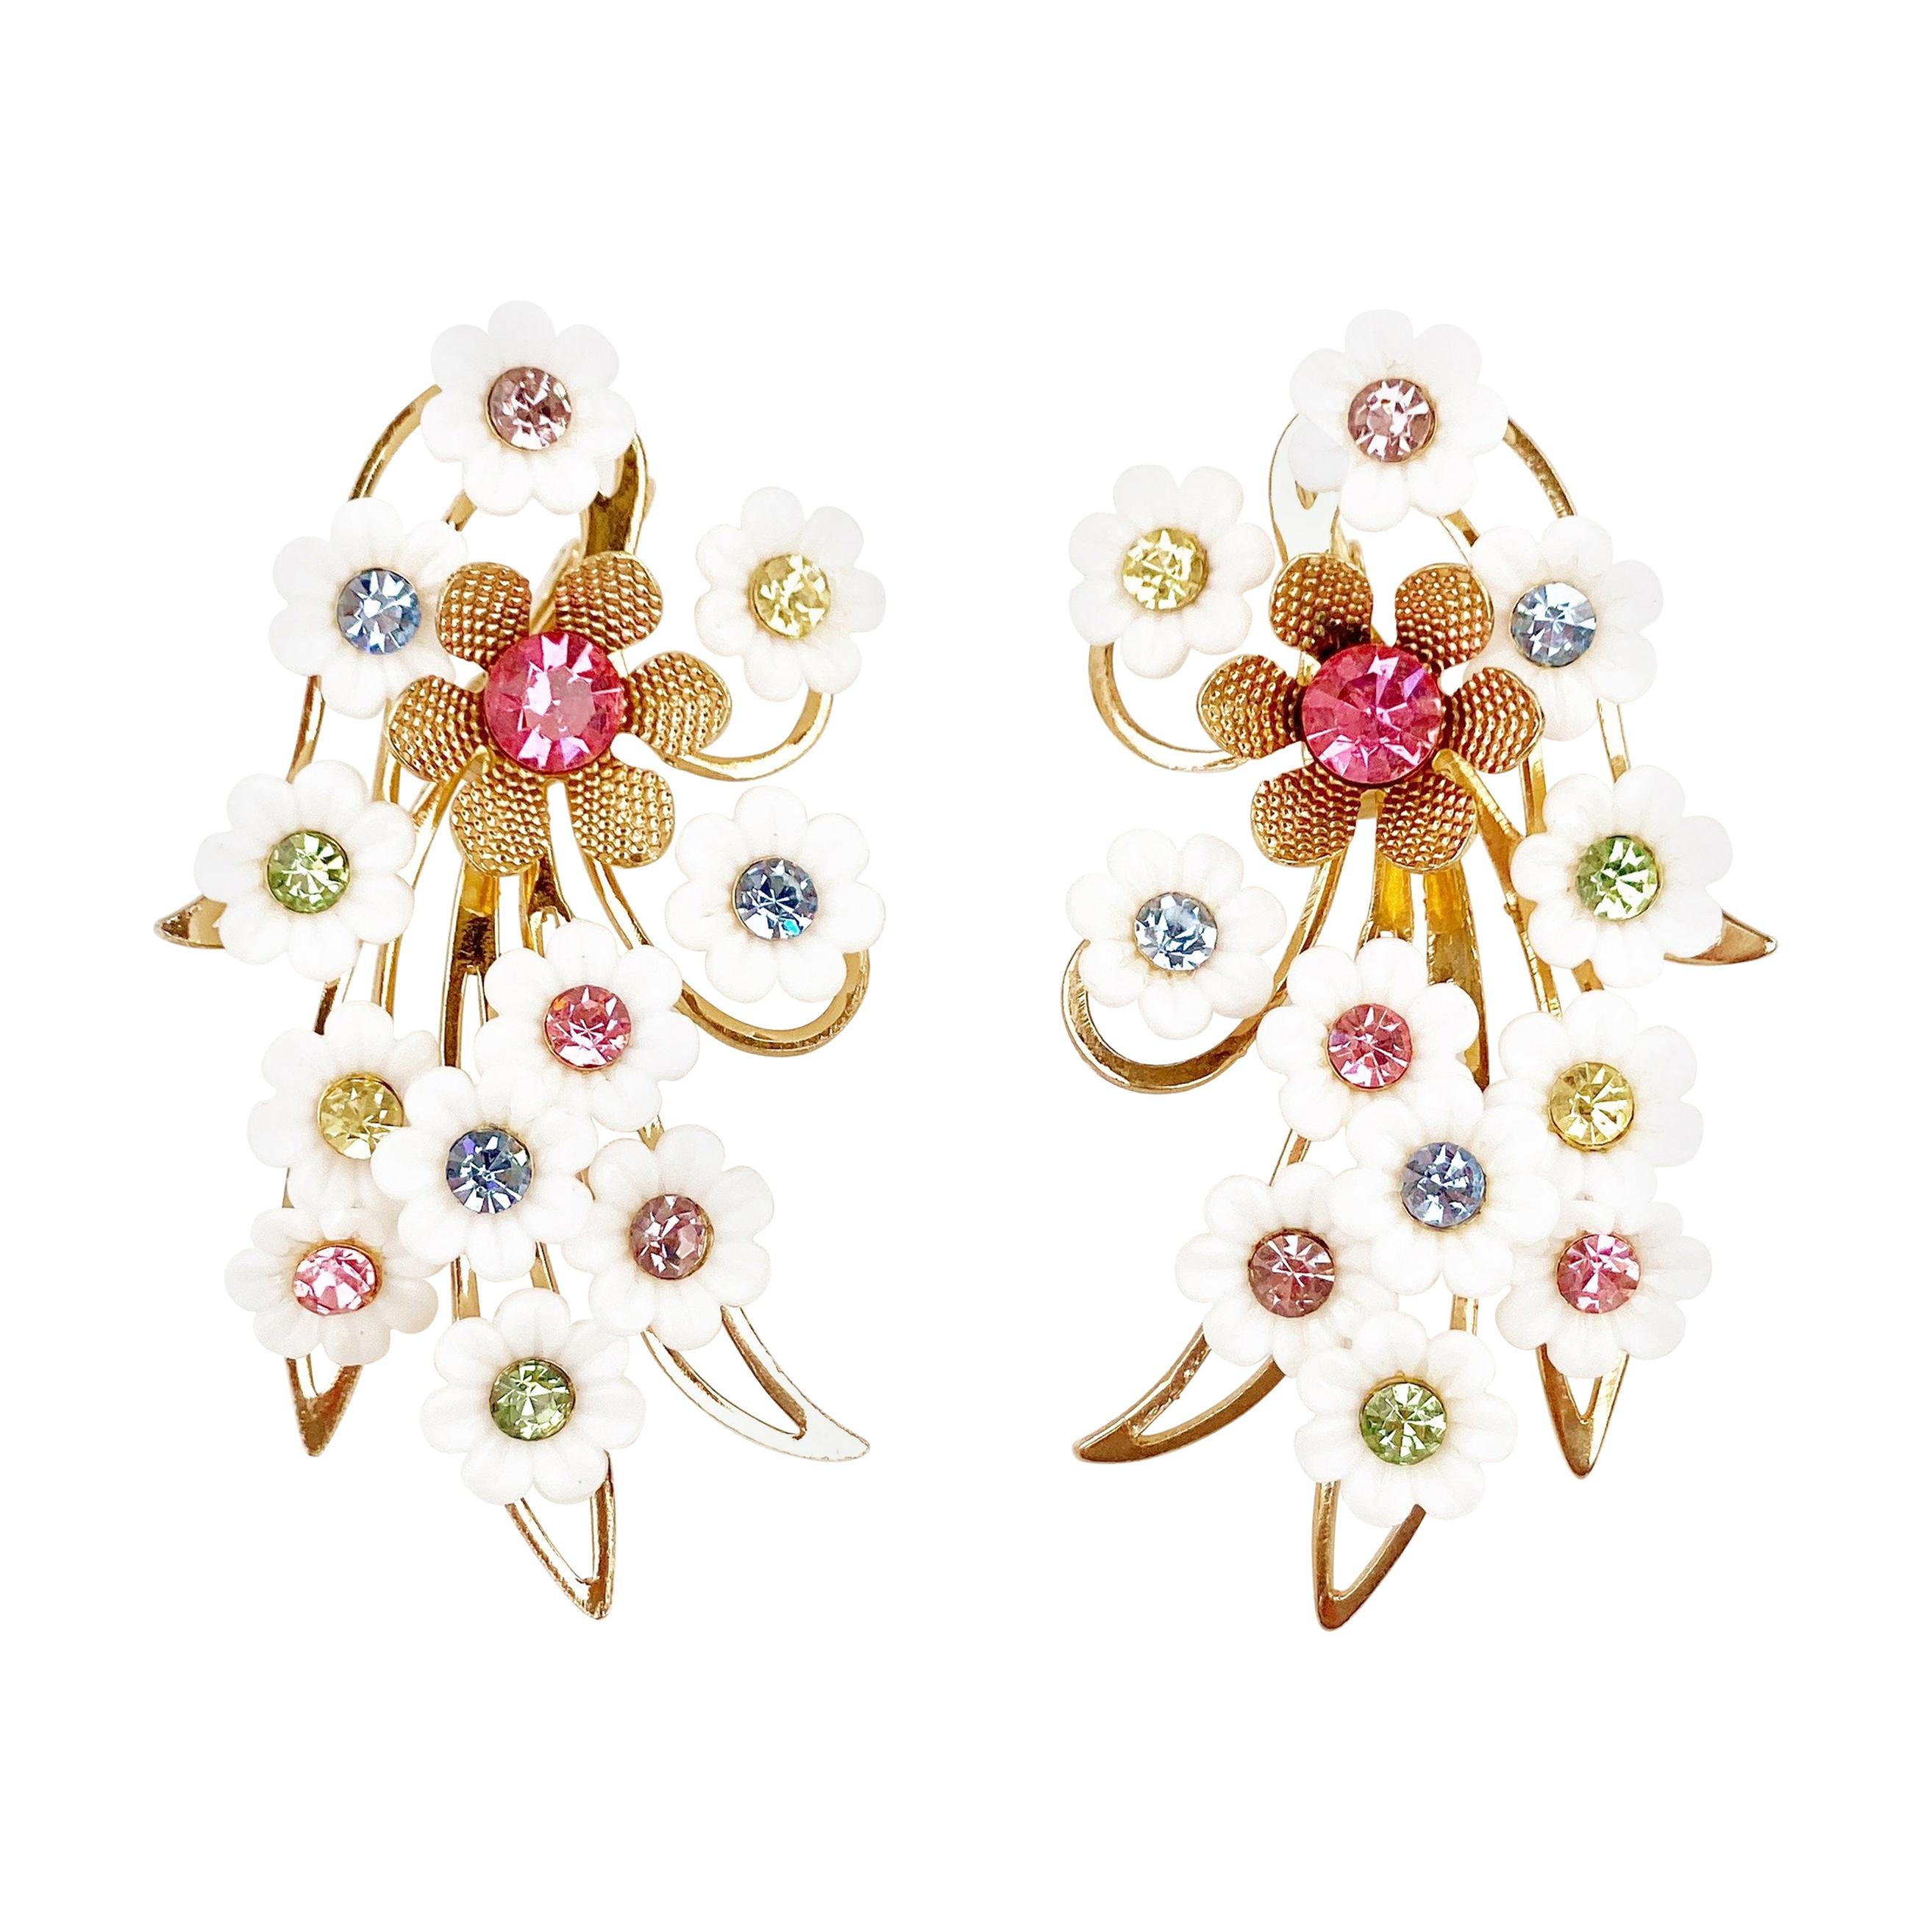 Plastic Flower Ear Climber Earrings With Pastel Rhinestones By Emmons, 1960s